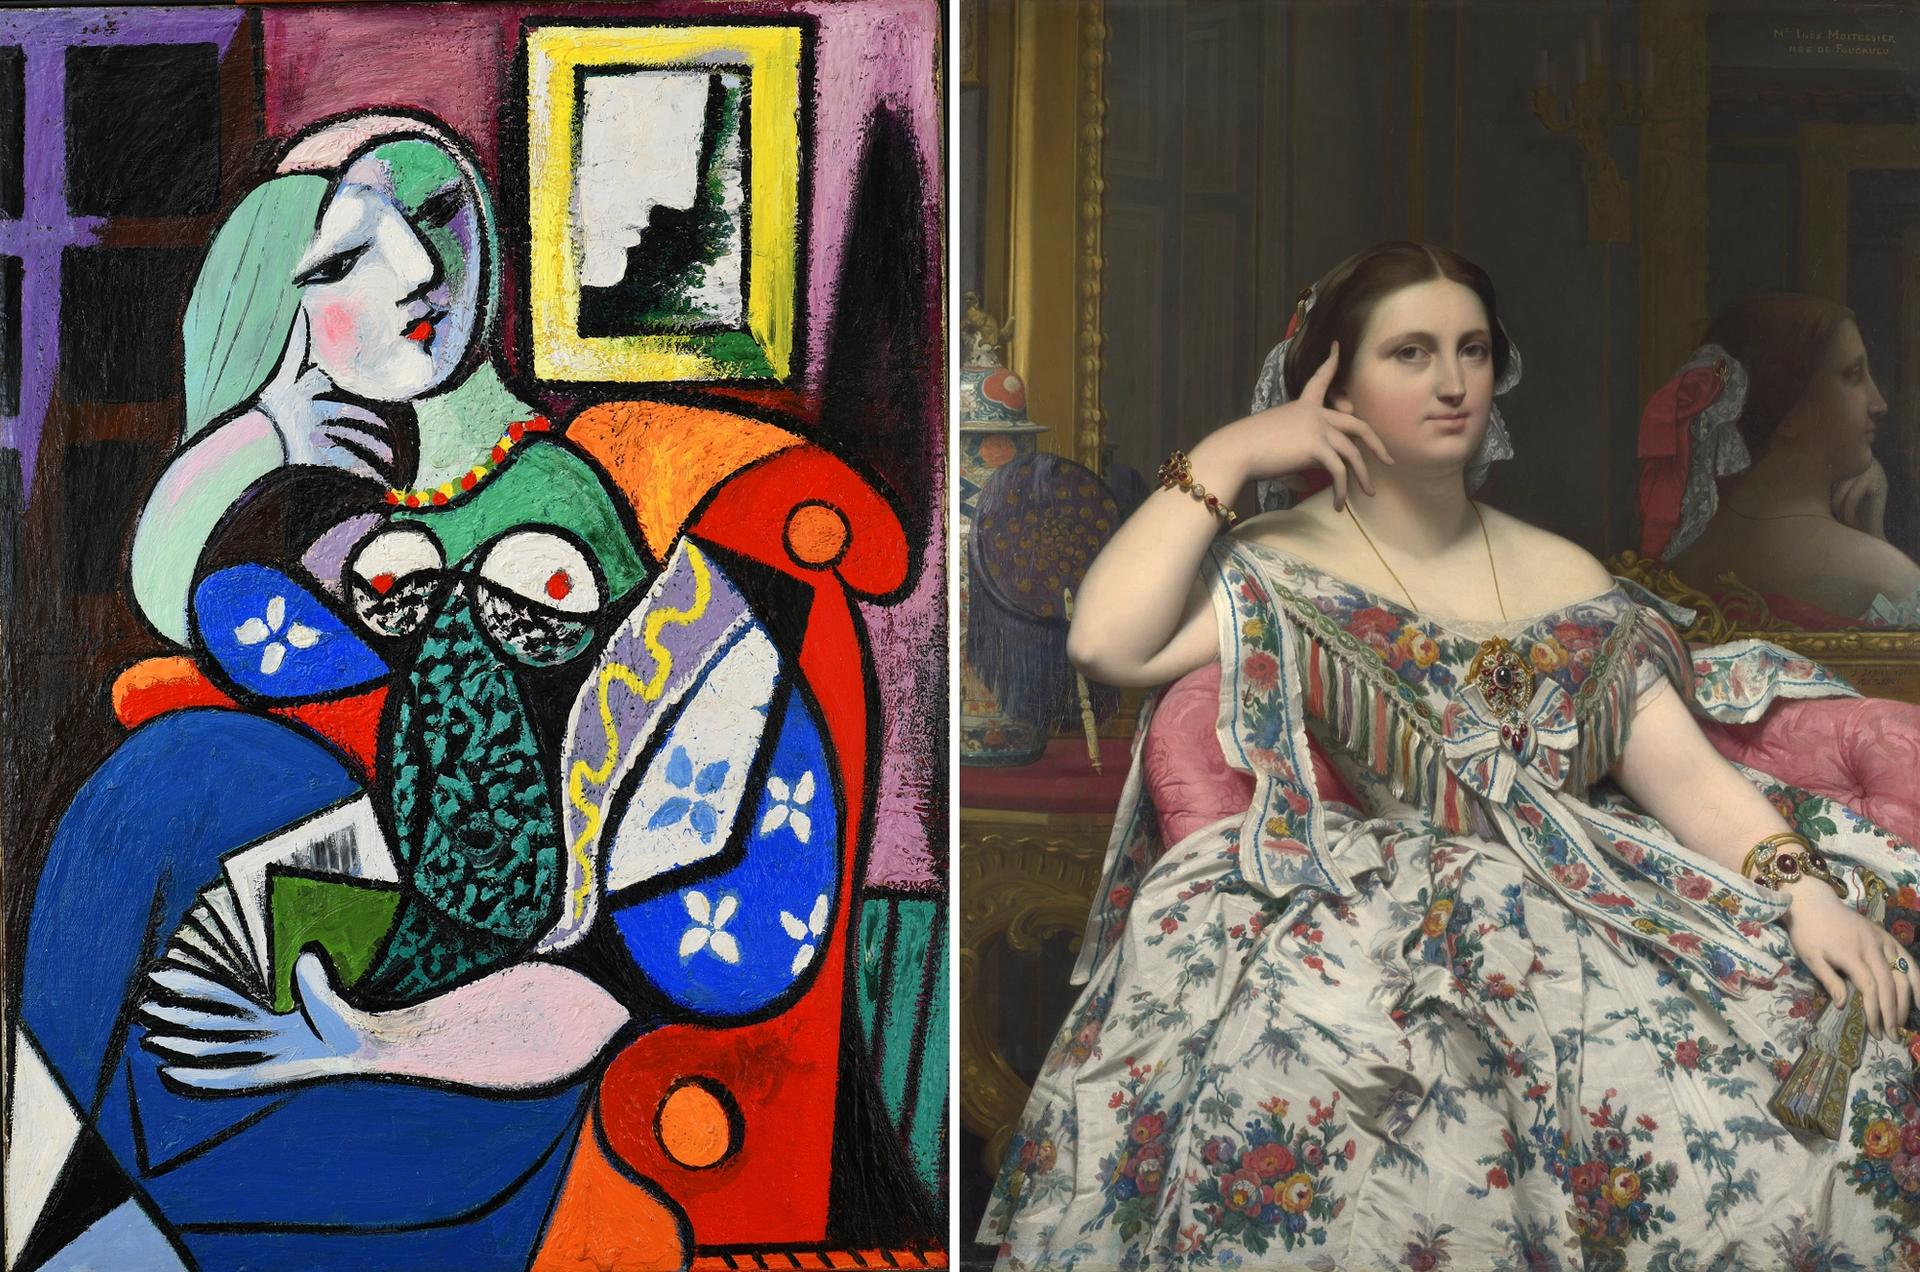 Pablo Picasso's Woman with a Book (1932, left) and Jean-Auguste-Dominique Ingres's Madame Moitessier (1856, right) Picasso: © Succession Picasso/DACS 2021 / Photo: The Norton Simon Foundation; Ingres: © The National Gallery, London